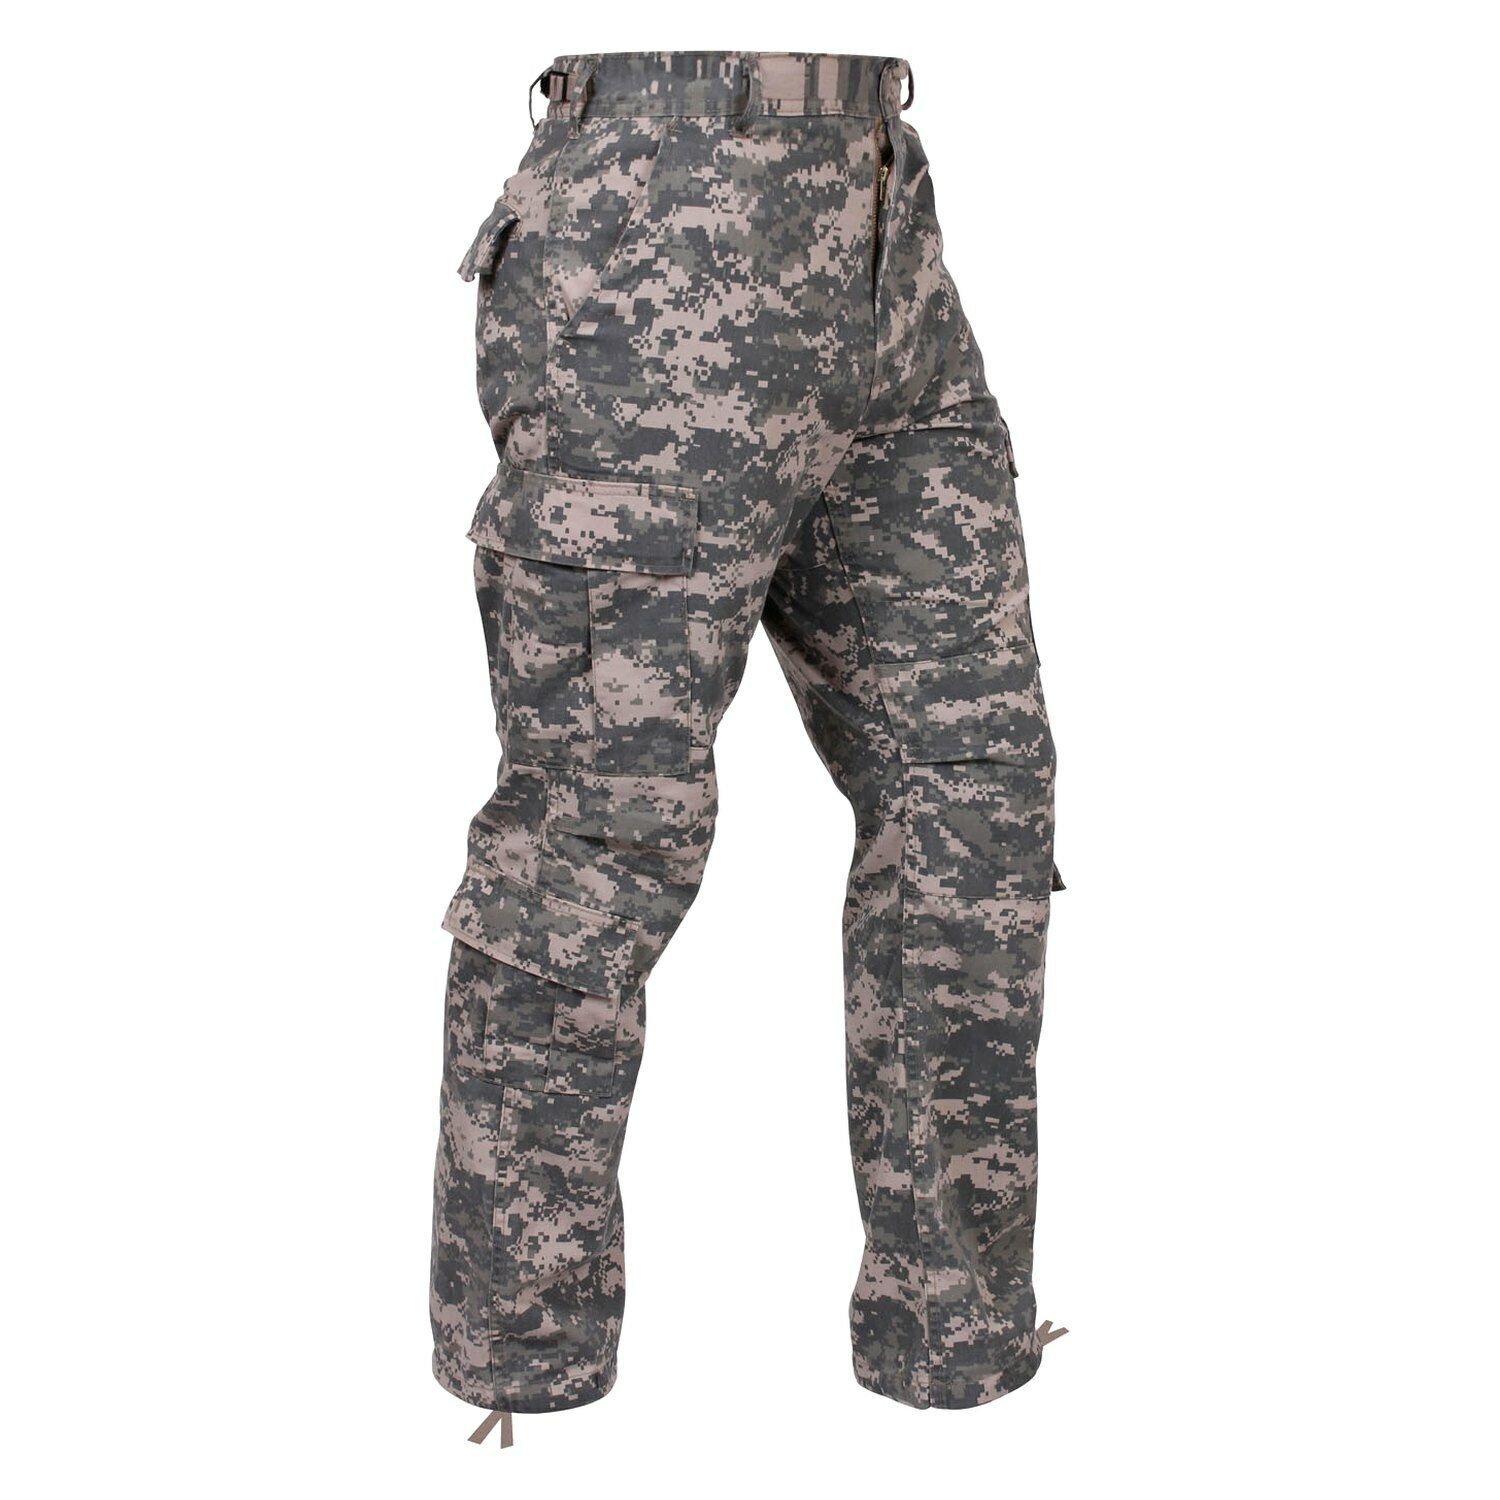 Rothco Military Camouflage BDU Army Fatigue Tactical Camo Pants (Choose Sizes)